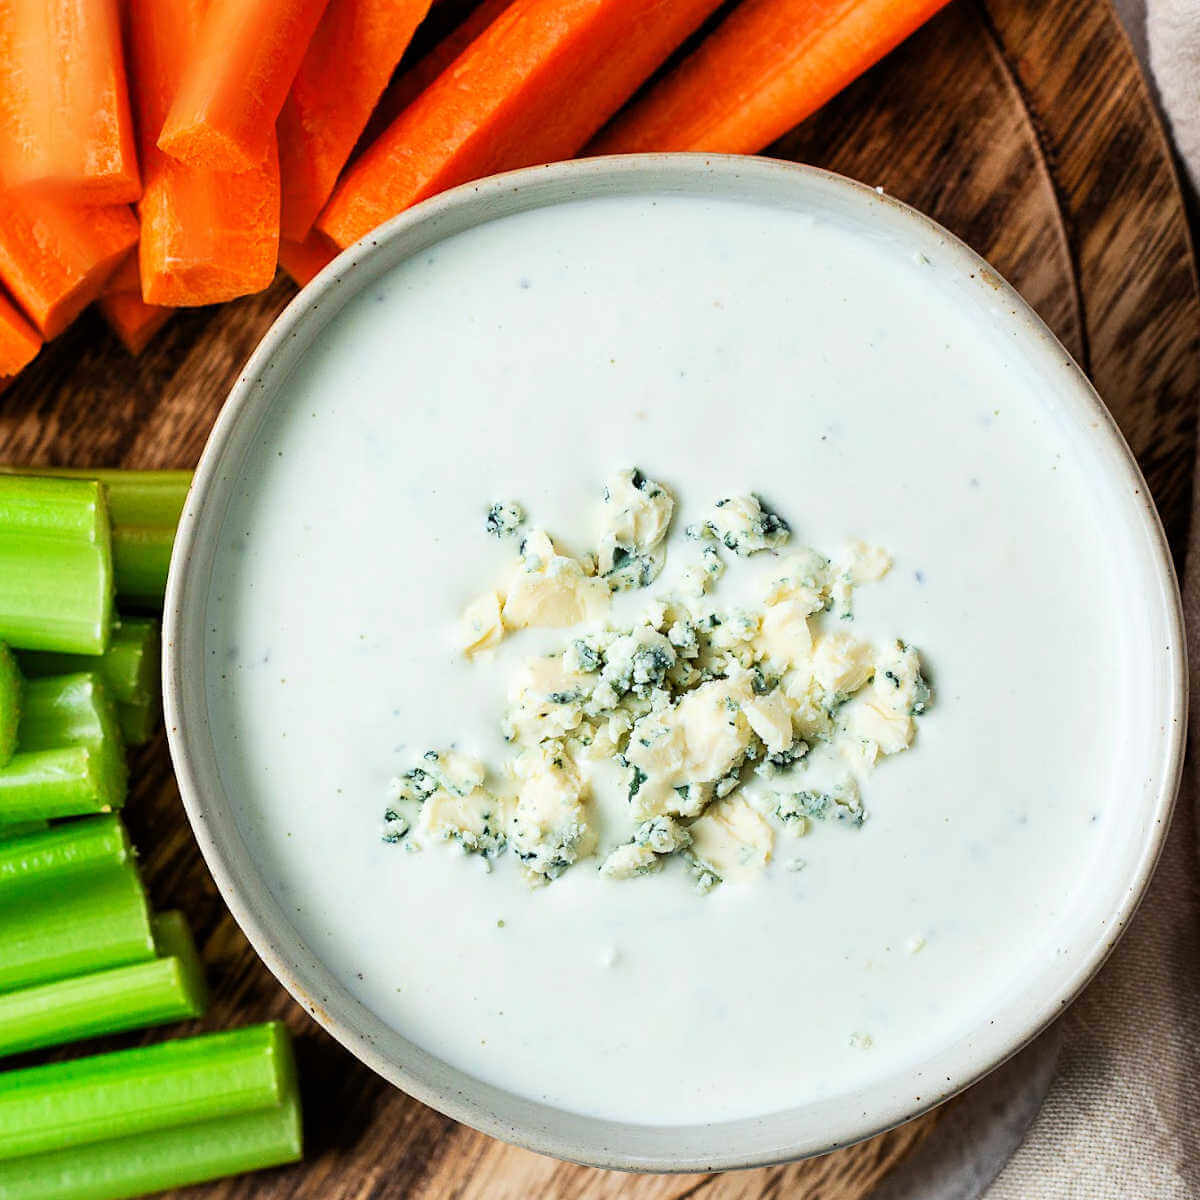 A bowl of blue cheese dressing on a board with vegetable sticks.